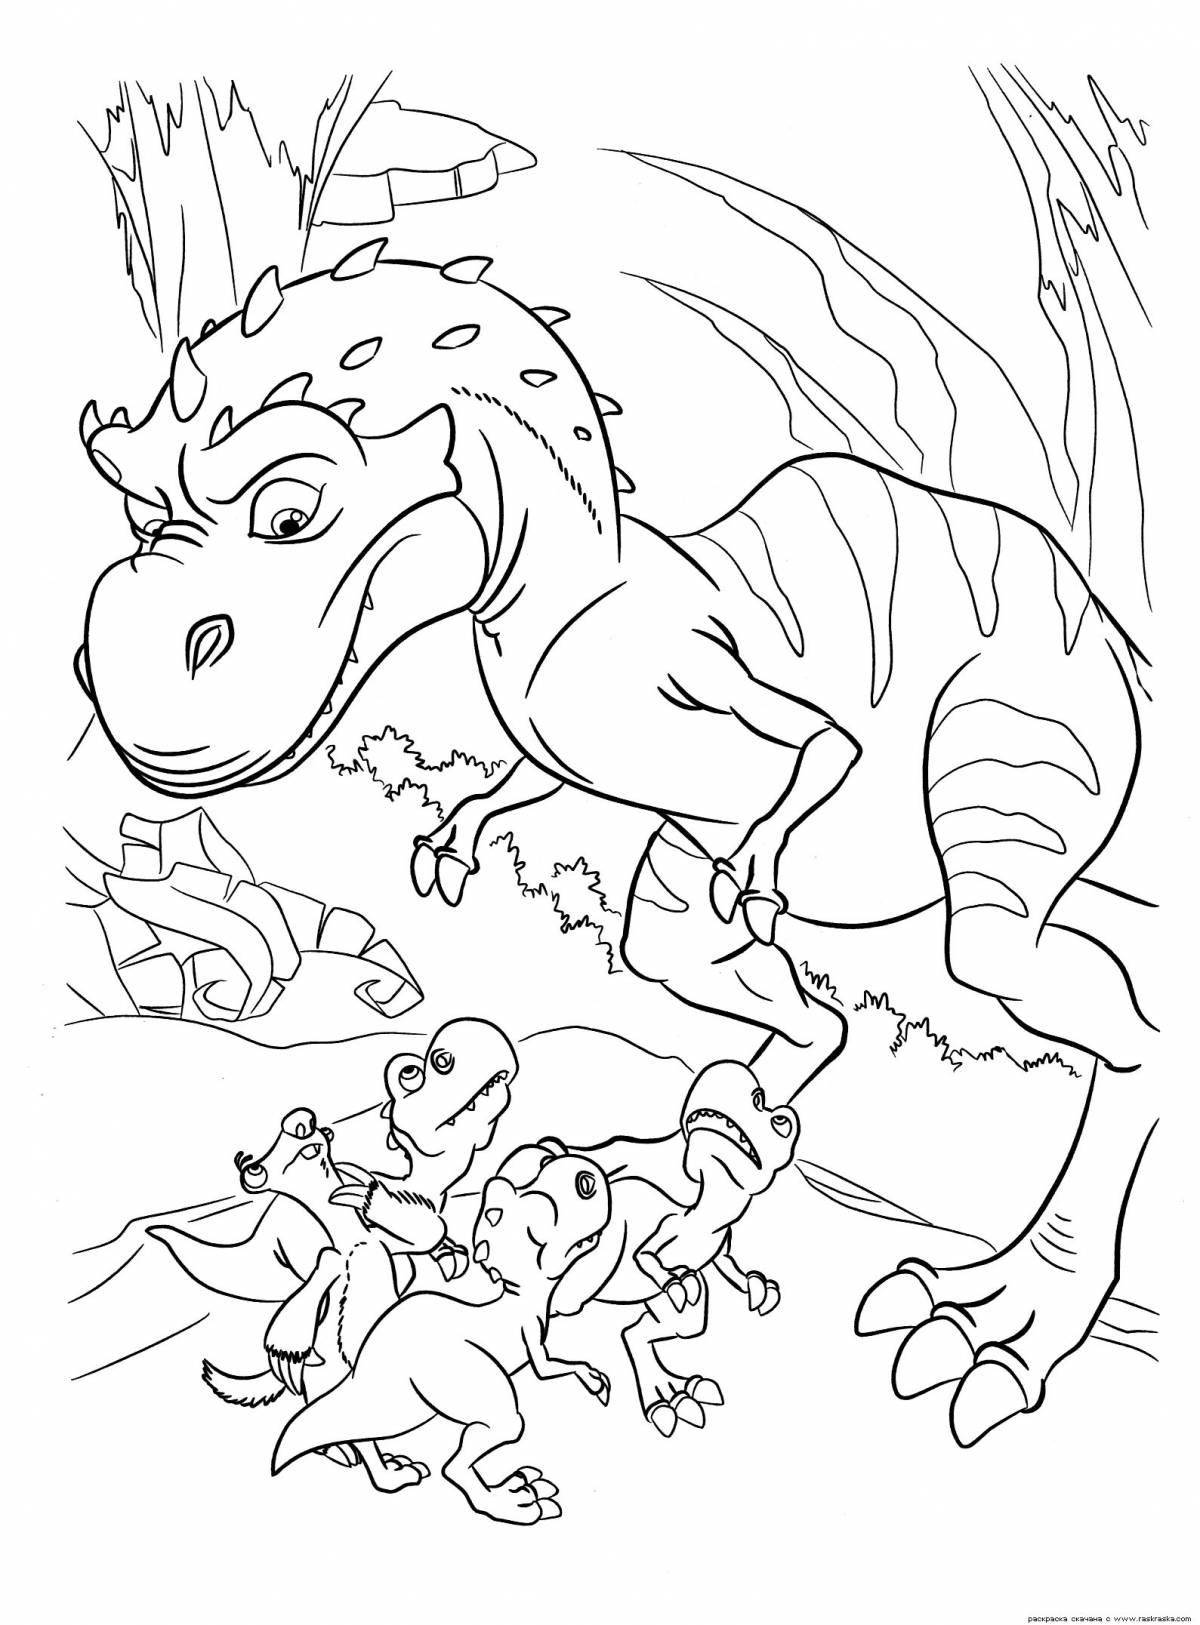 Marvelous ice age 3 coloring page